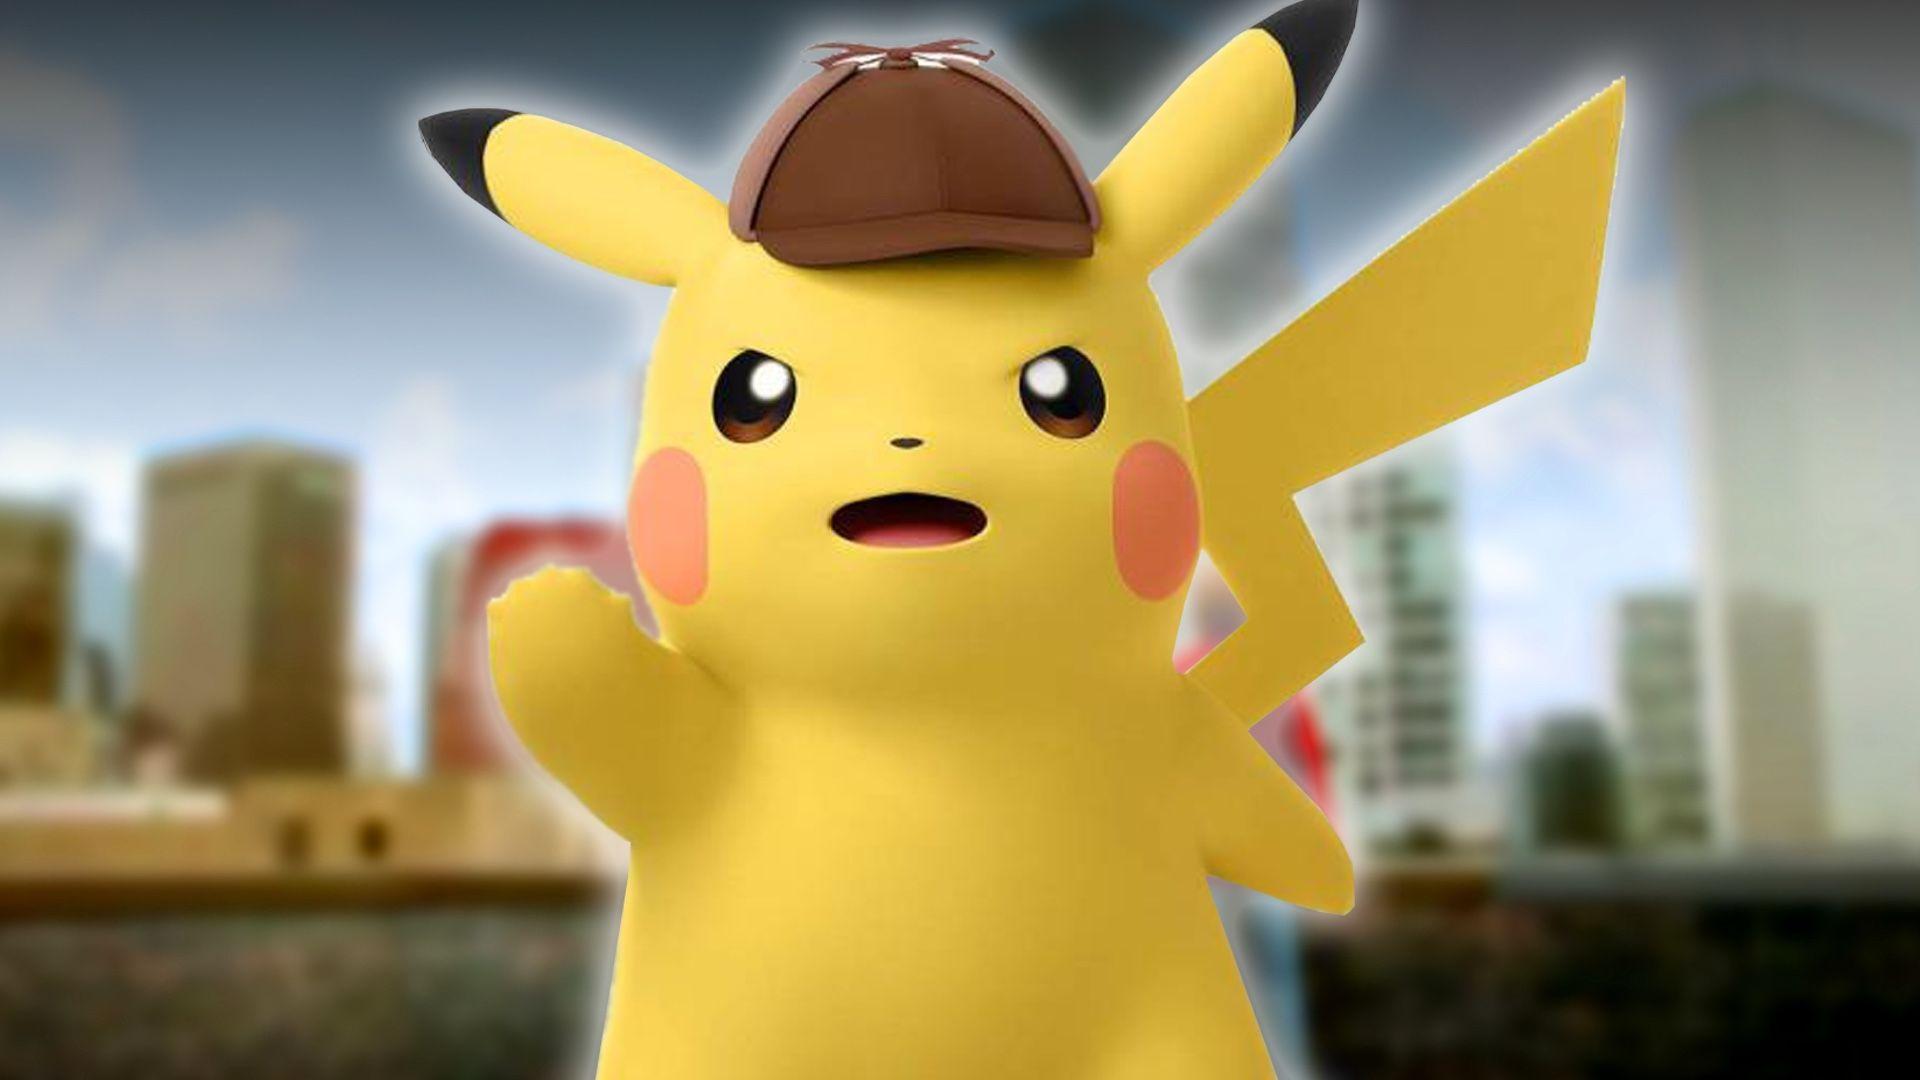 The DETECTIVE PIKACHU Pokemon Movie Will Be Directed